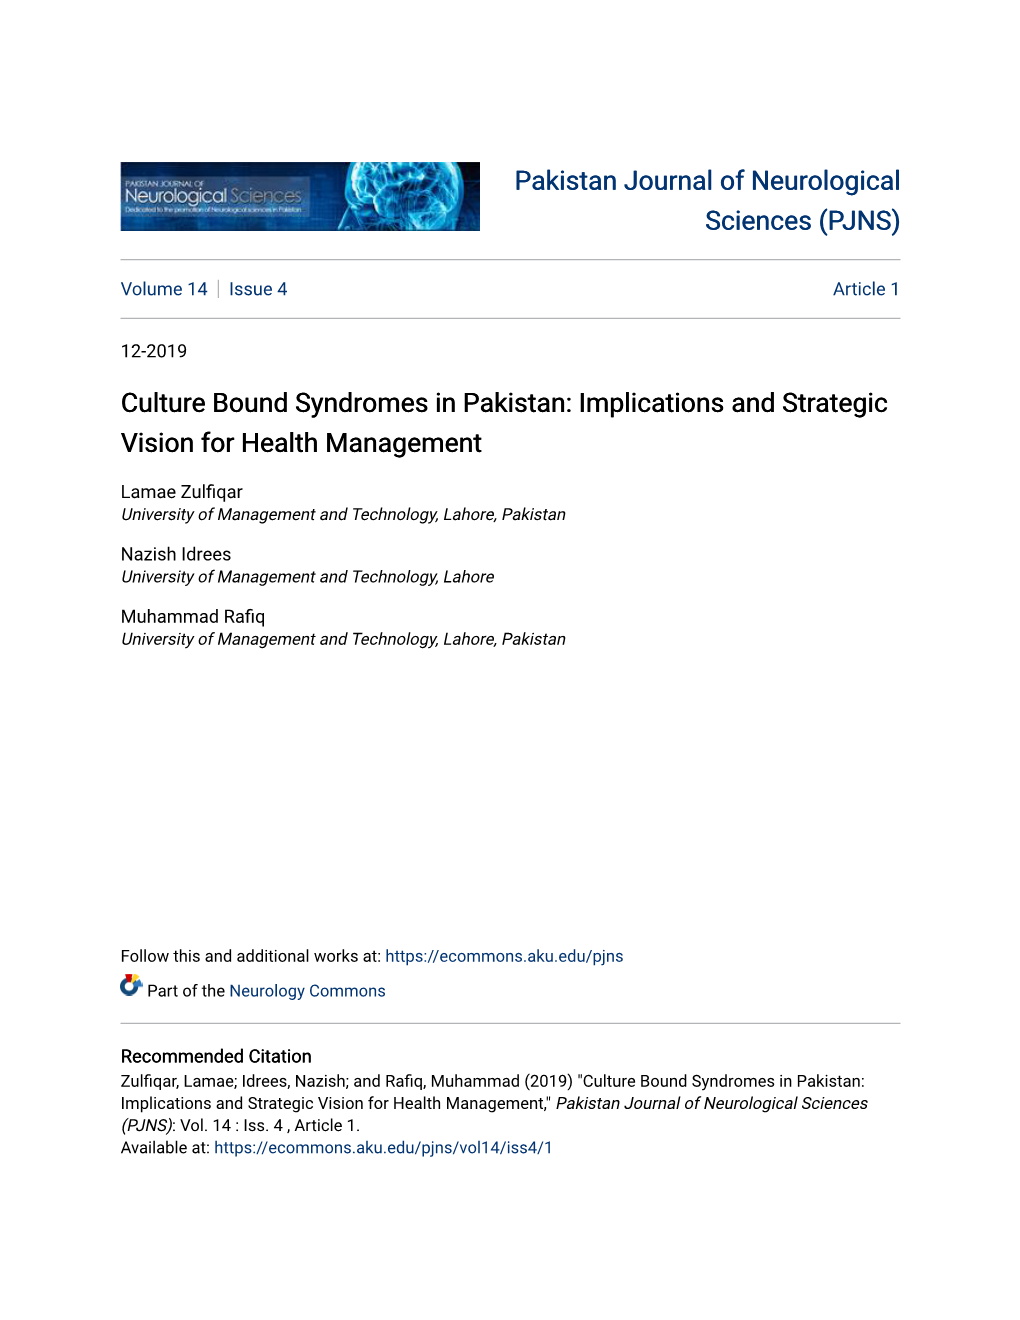 Culture Bound Syndromes in Pakistan: Implications and Strategic Vision for Health Management